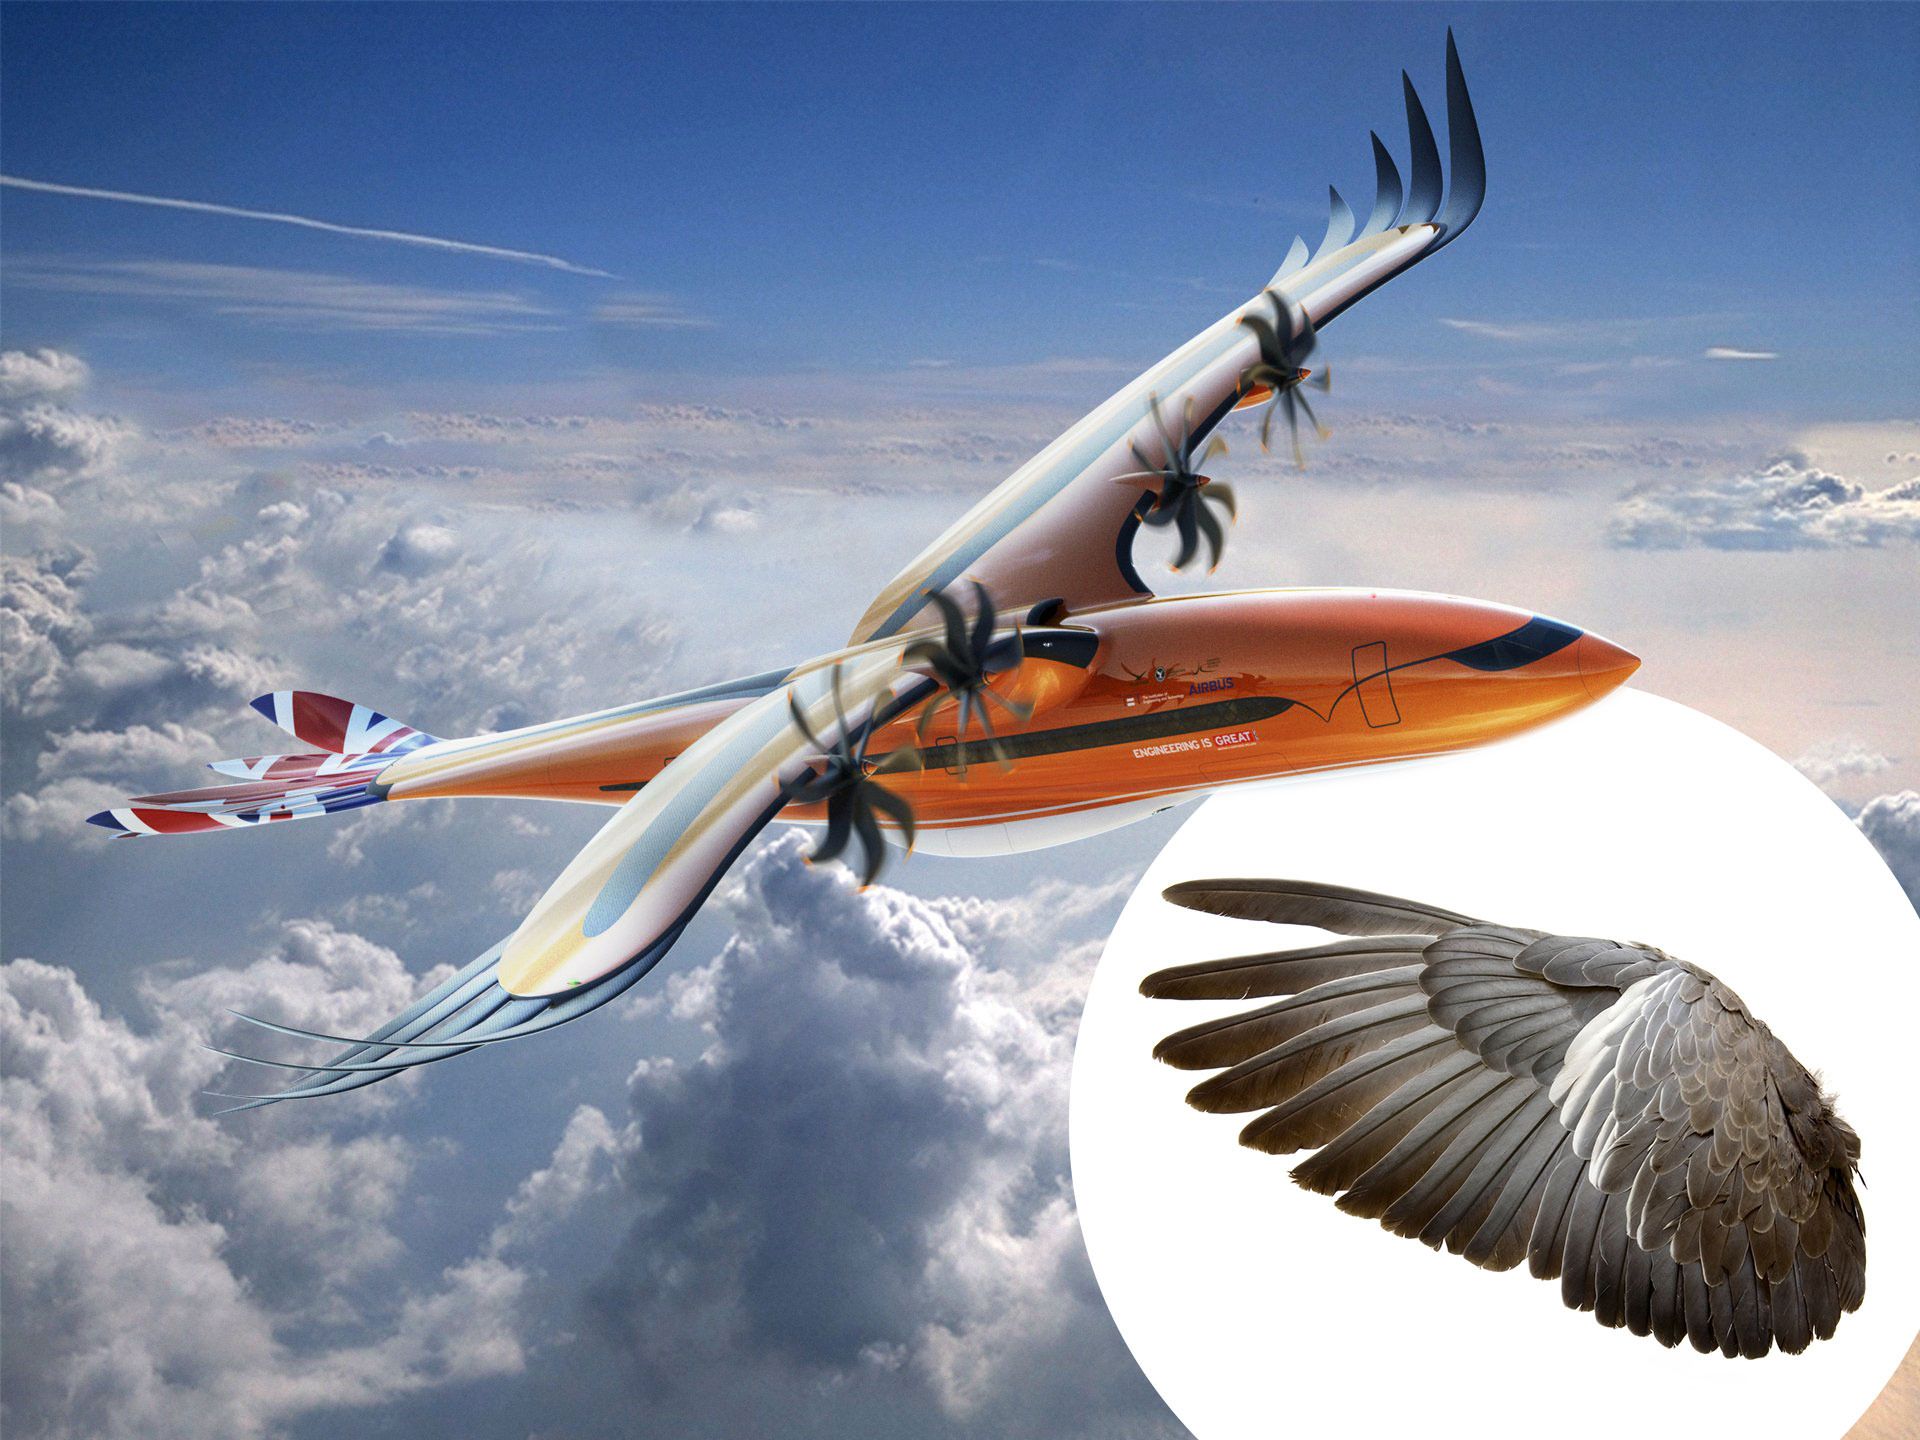 Nature Inspires Wing-in-Ground-Effect Aircraft, 2021-11-12